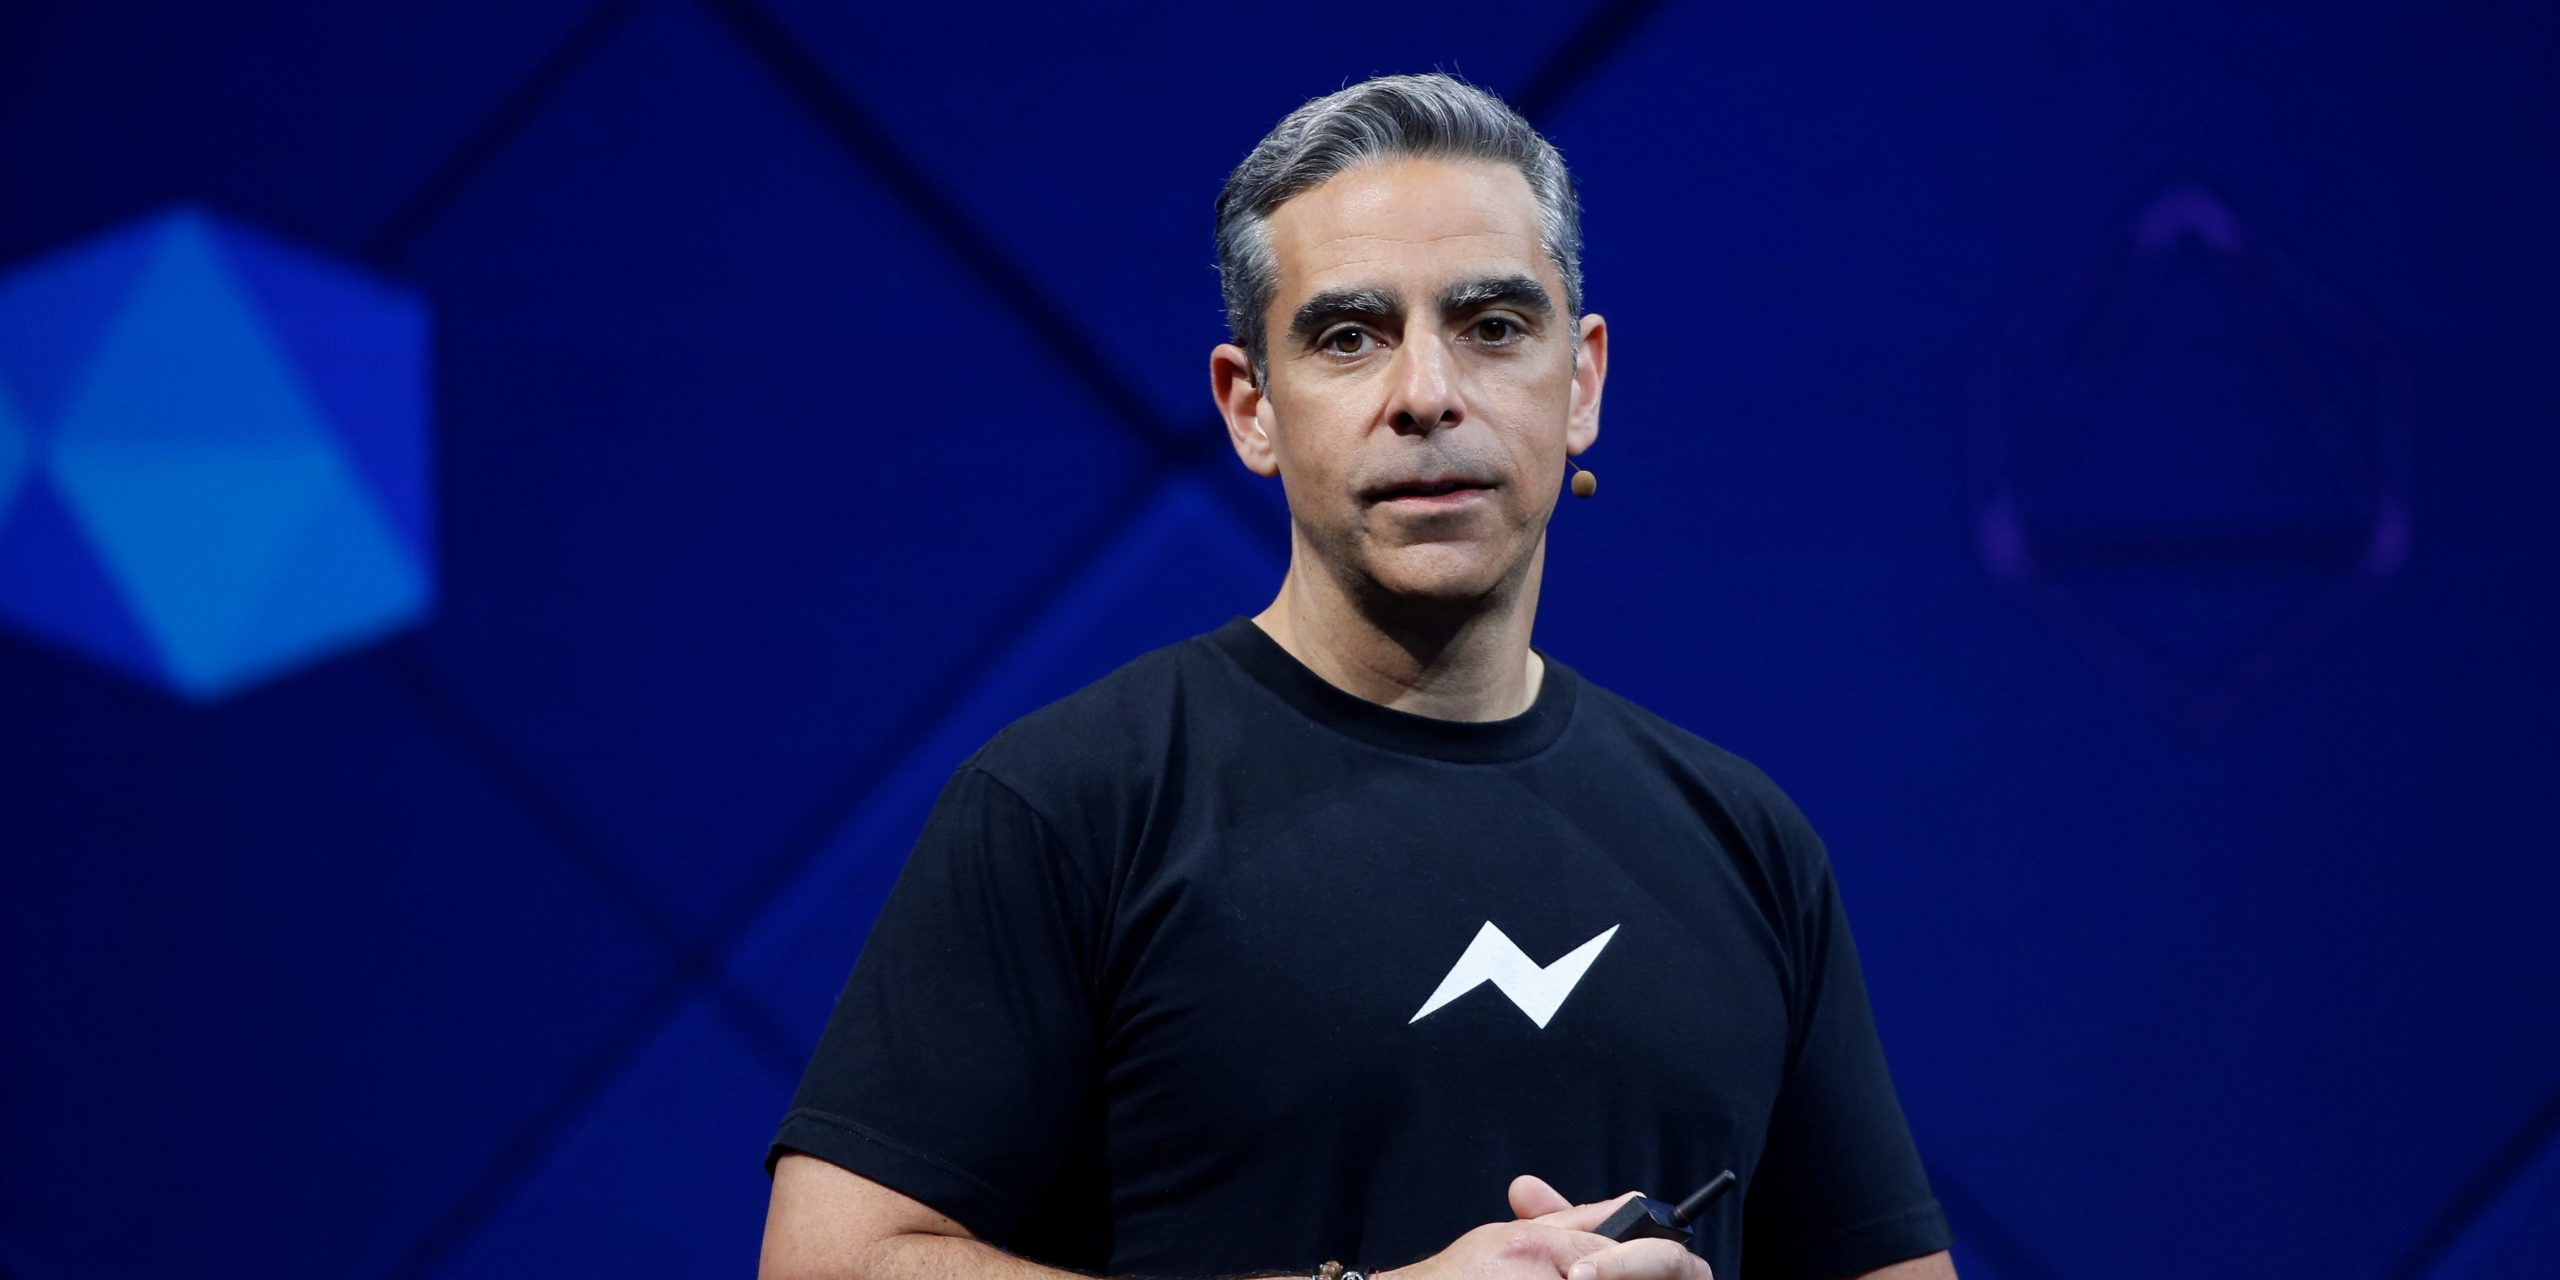 David Marcus of Facebook speaks on stage during the annual Facebook F8 developers conference in San Jose, California, U.S., April 18, 2017.